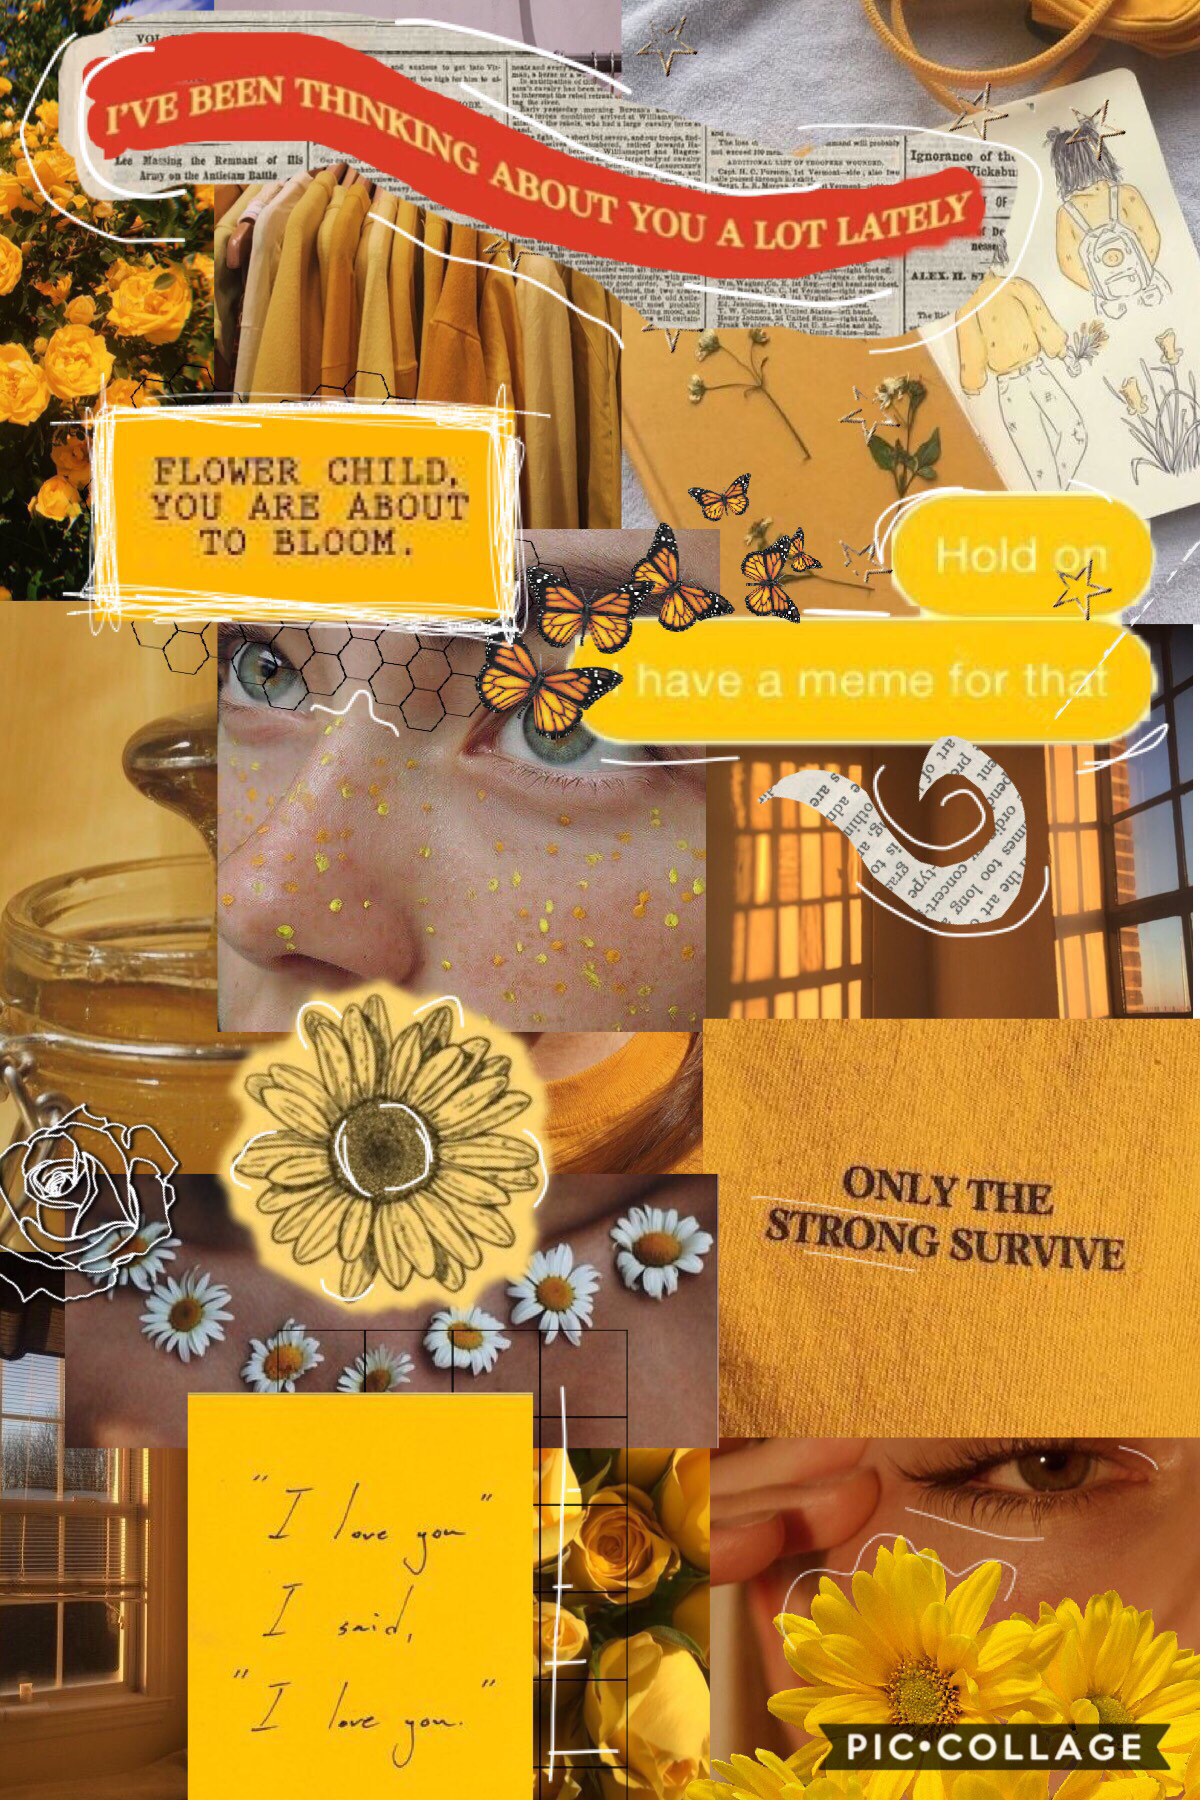 ✨”i’ve been thinking about you a lot lately”✨

first post!! agh i’m kinda proud of this but i hope to improve in the future. i’ve never done this style of collage before and i hope i get better at it! love you all💛